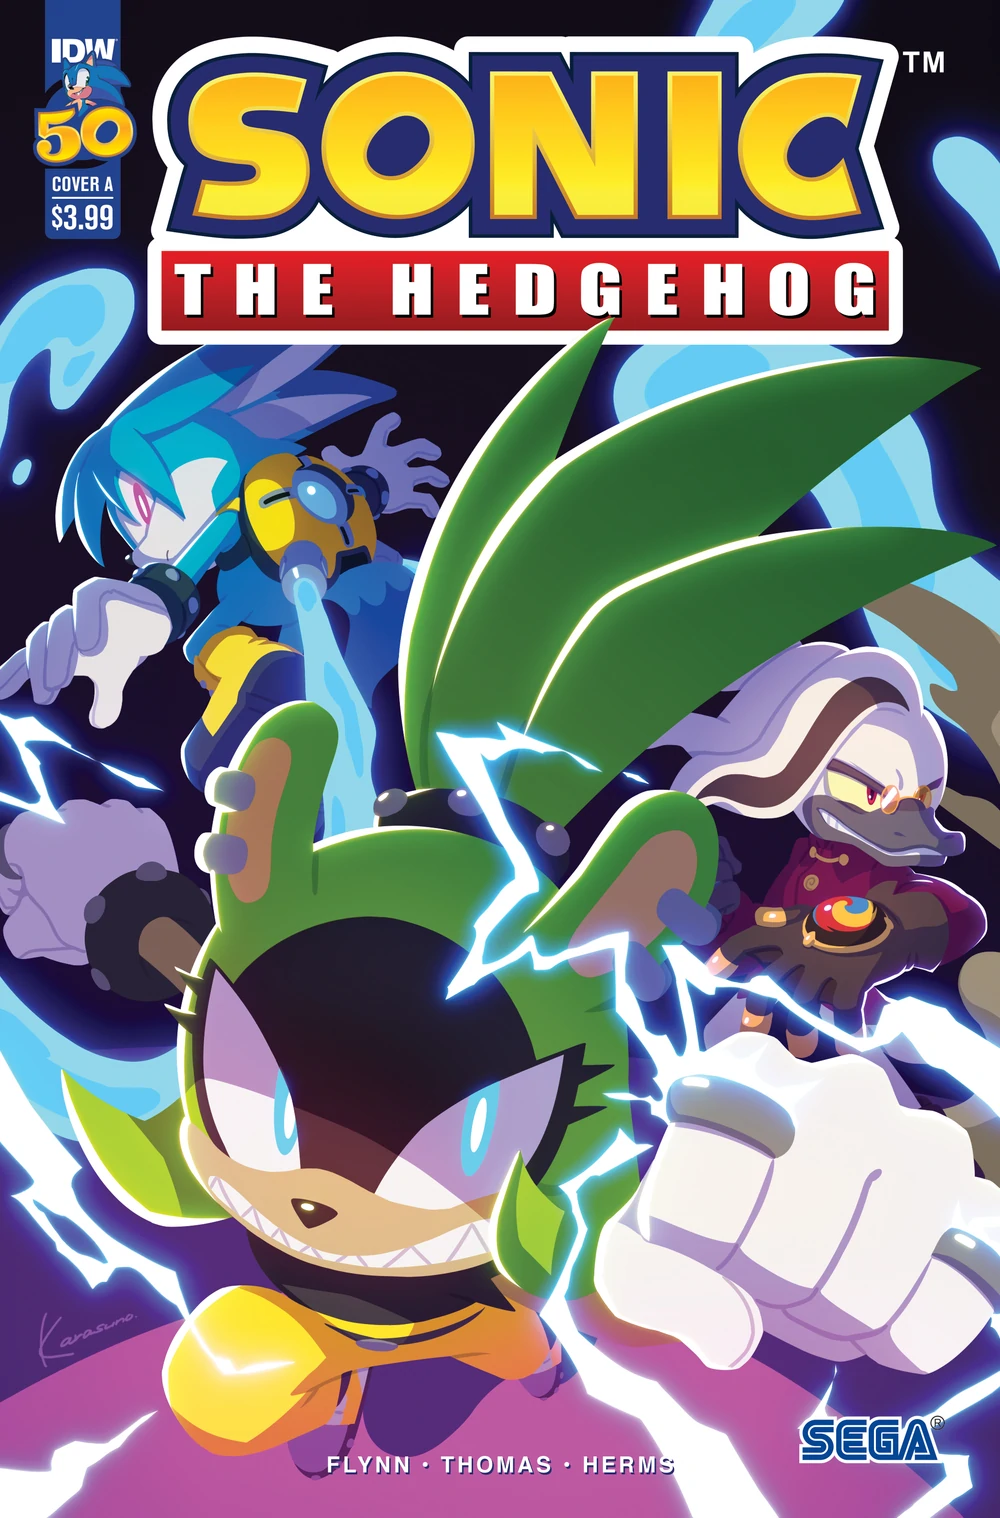 Sonic The Hedgehog #50 Cover A